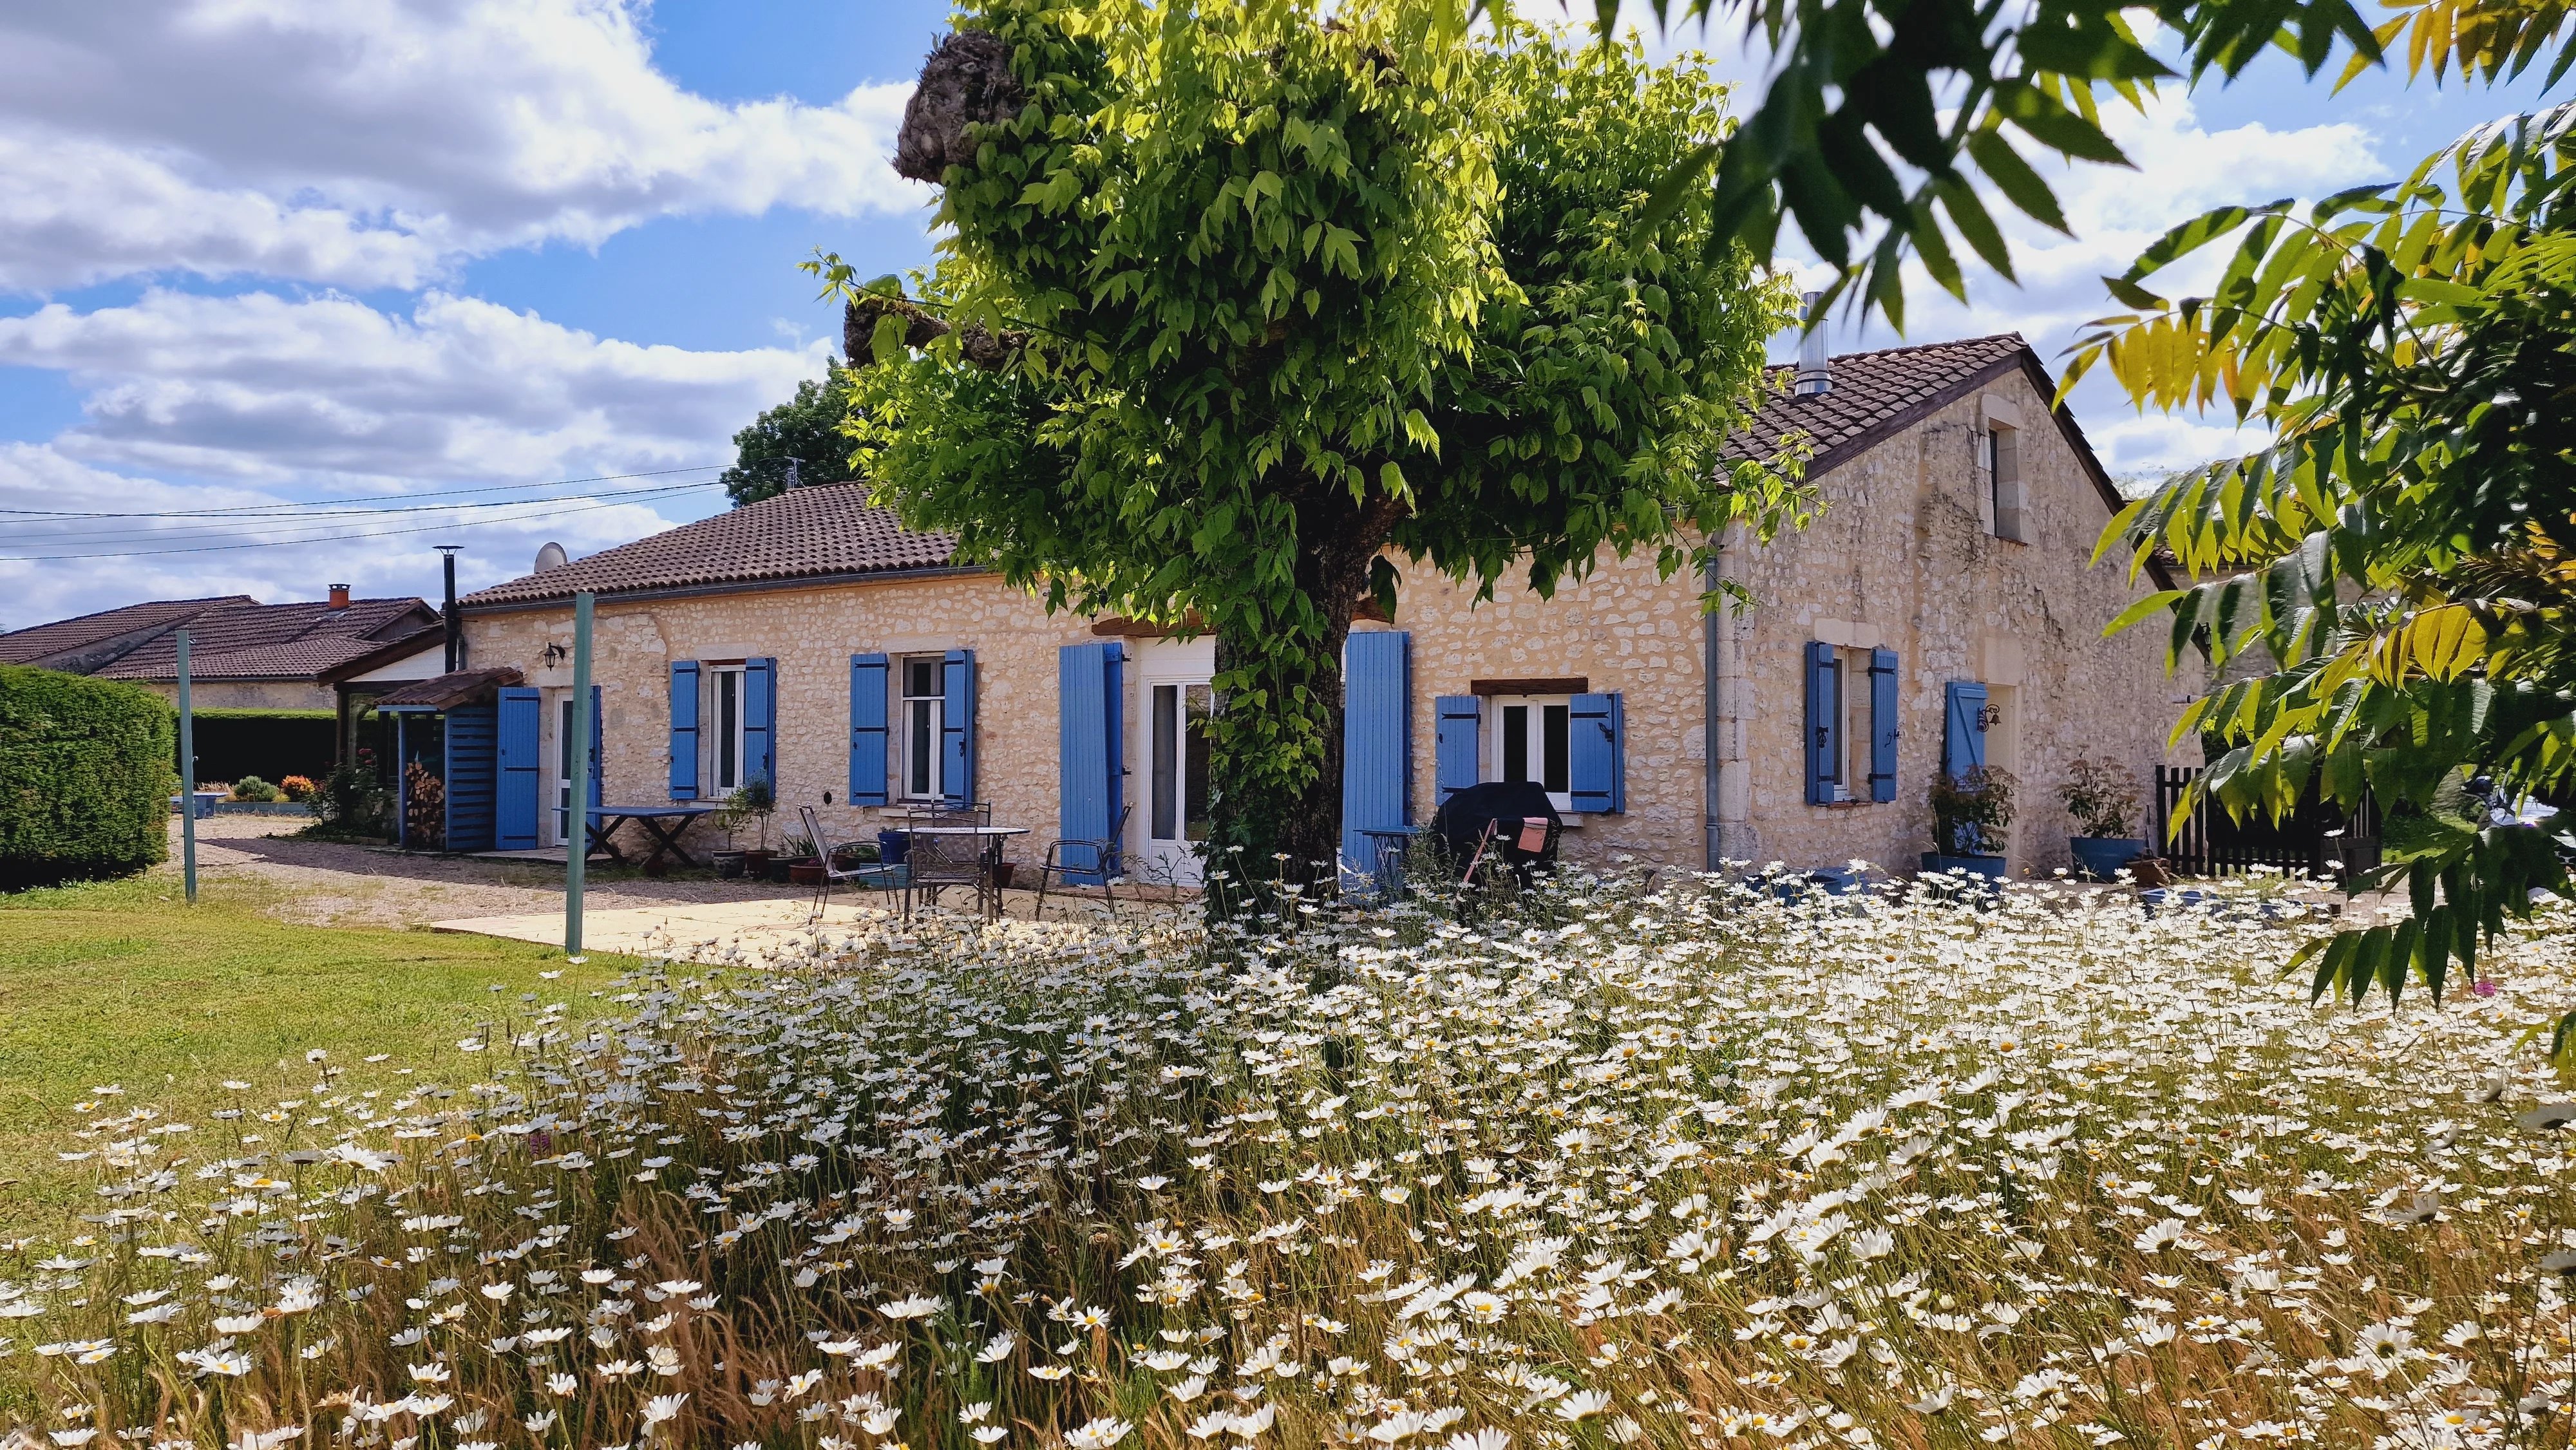 4 bedroom country home with heated swimming pool near Duras